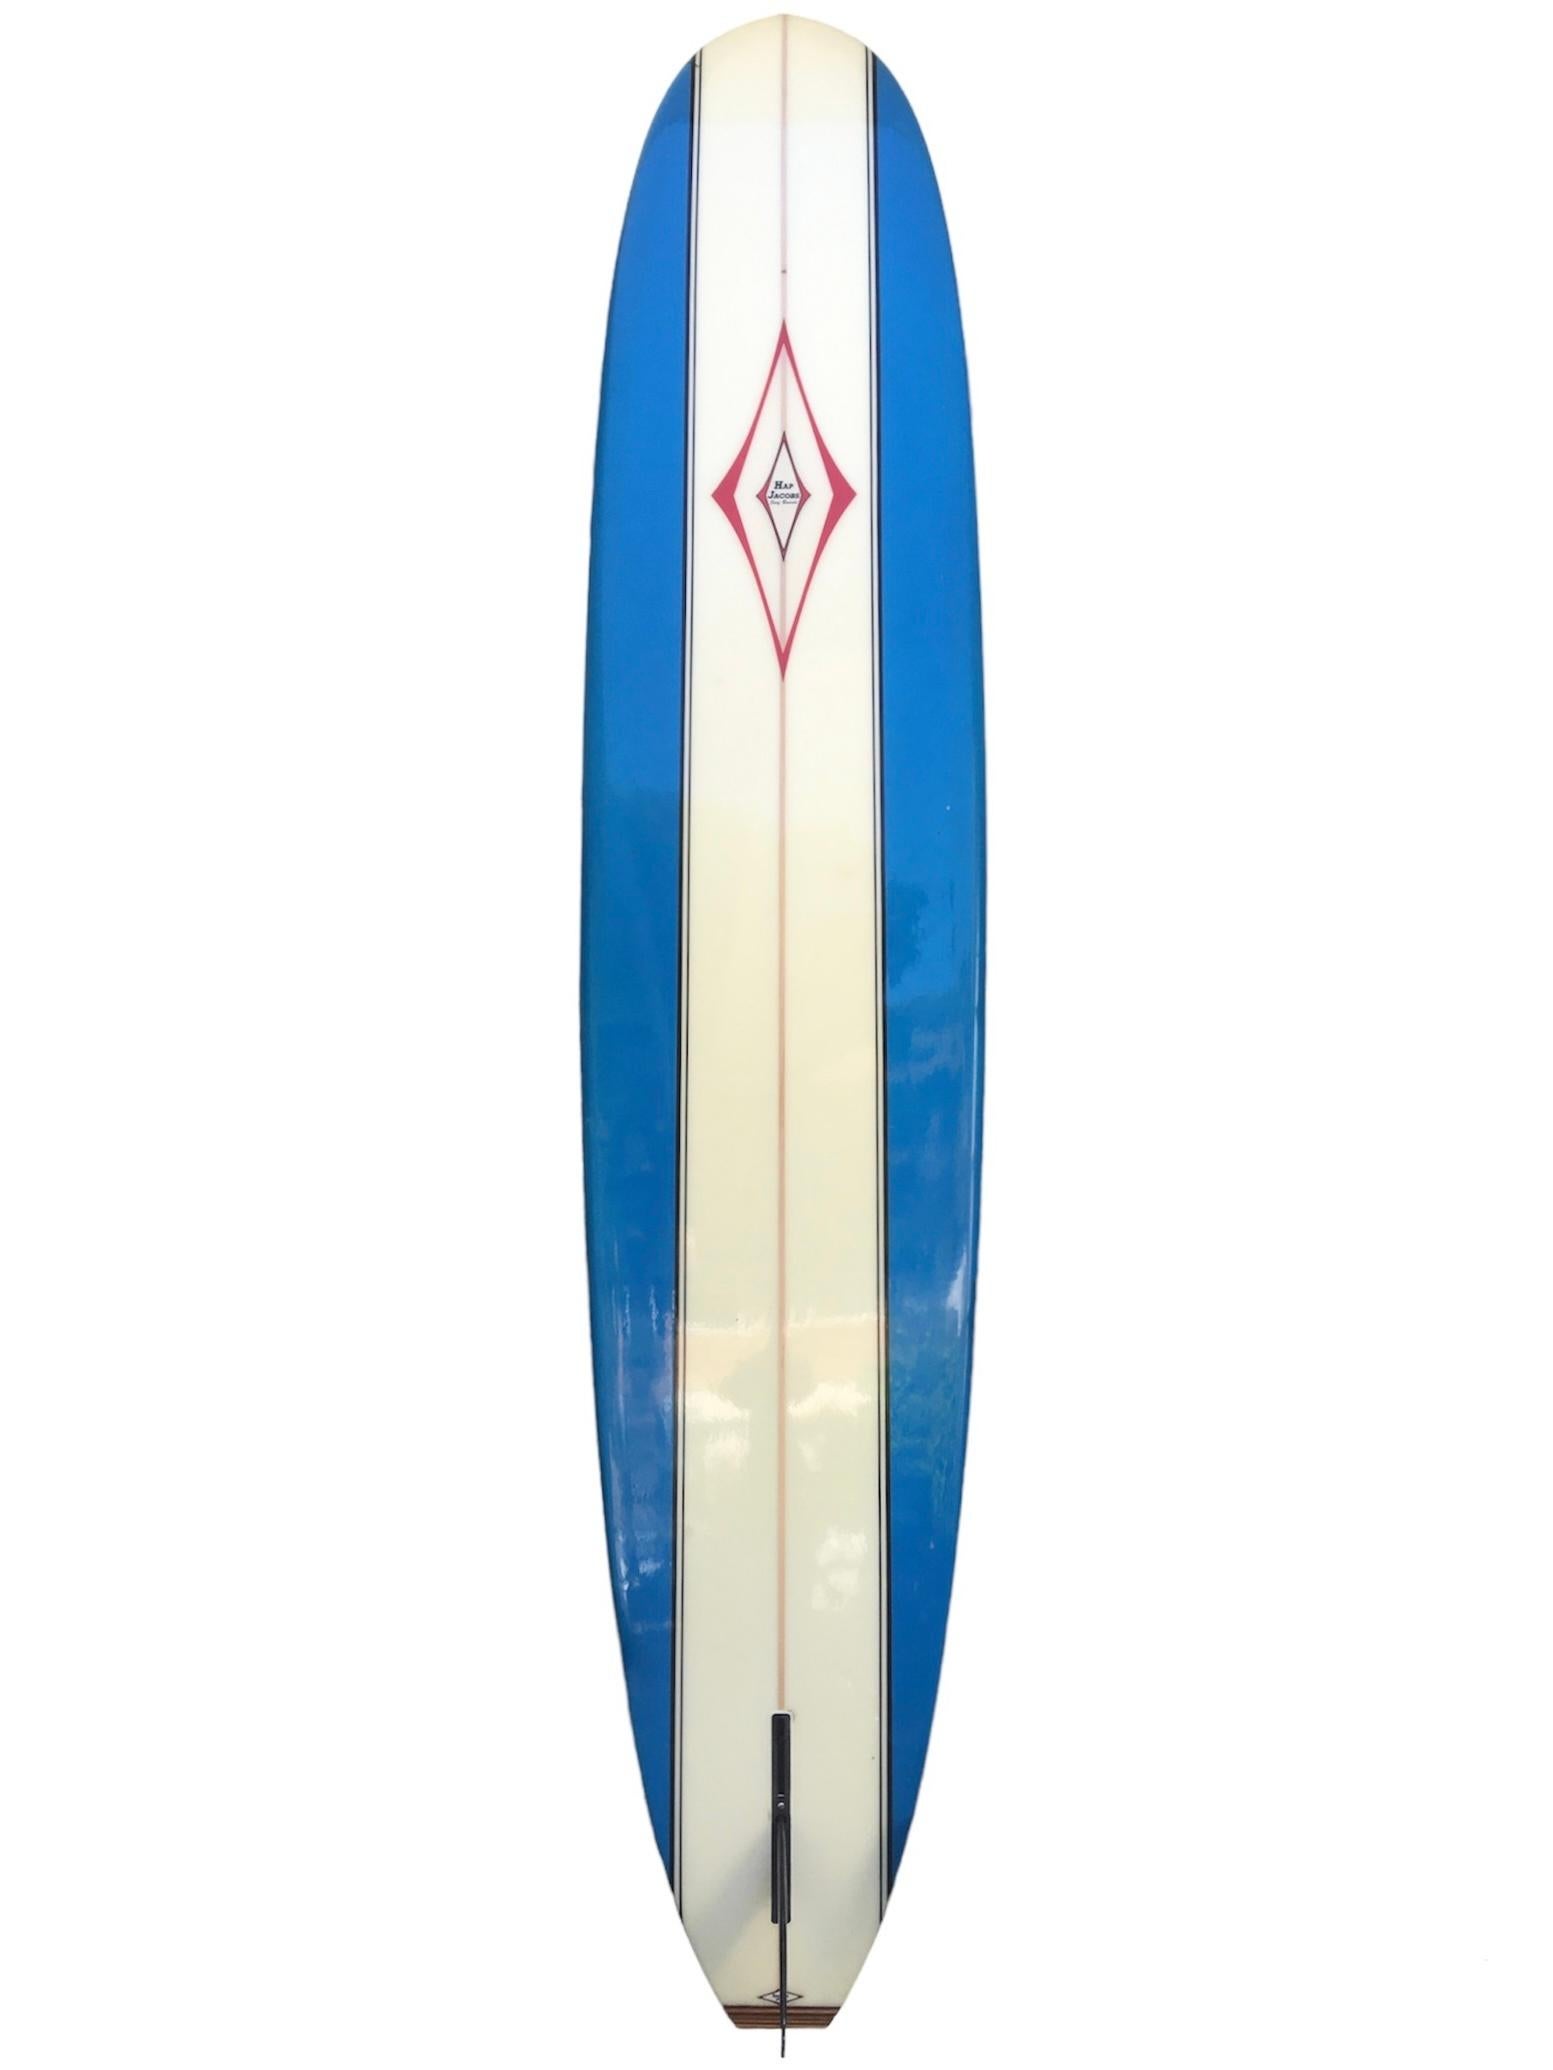 Vintage 1990s Hap Jacobs classic longboard. Hand made by the late Hap Jacobs (1930-2021). Features gorgeous blue panels with black pinstriping and beautiful wood tailblock. Hand signed by Hap Jacobs. A remarkable example of a classic longboard